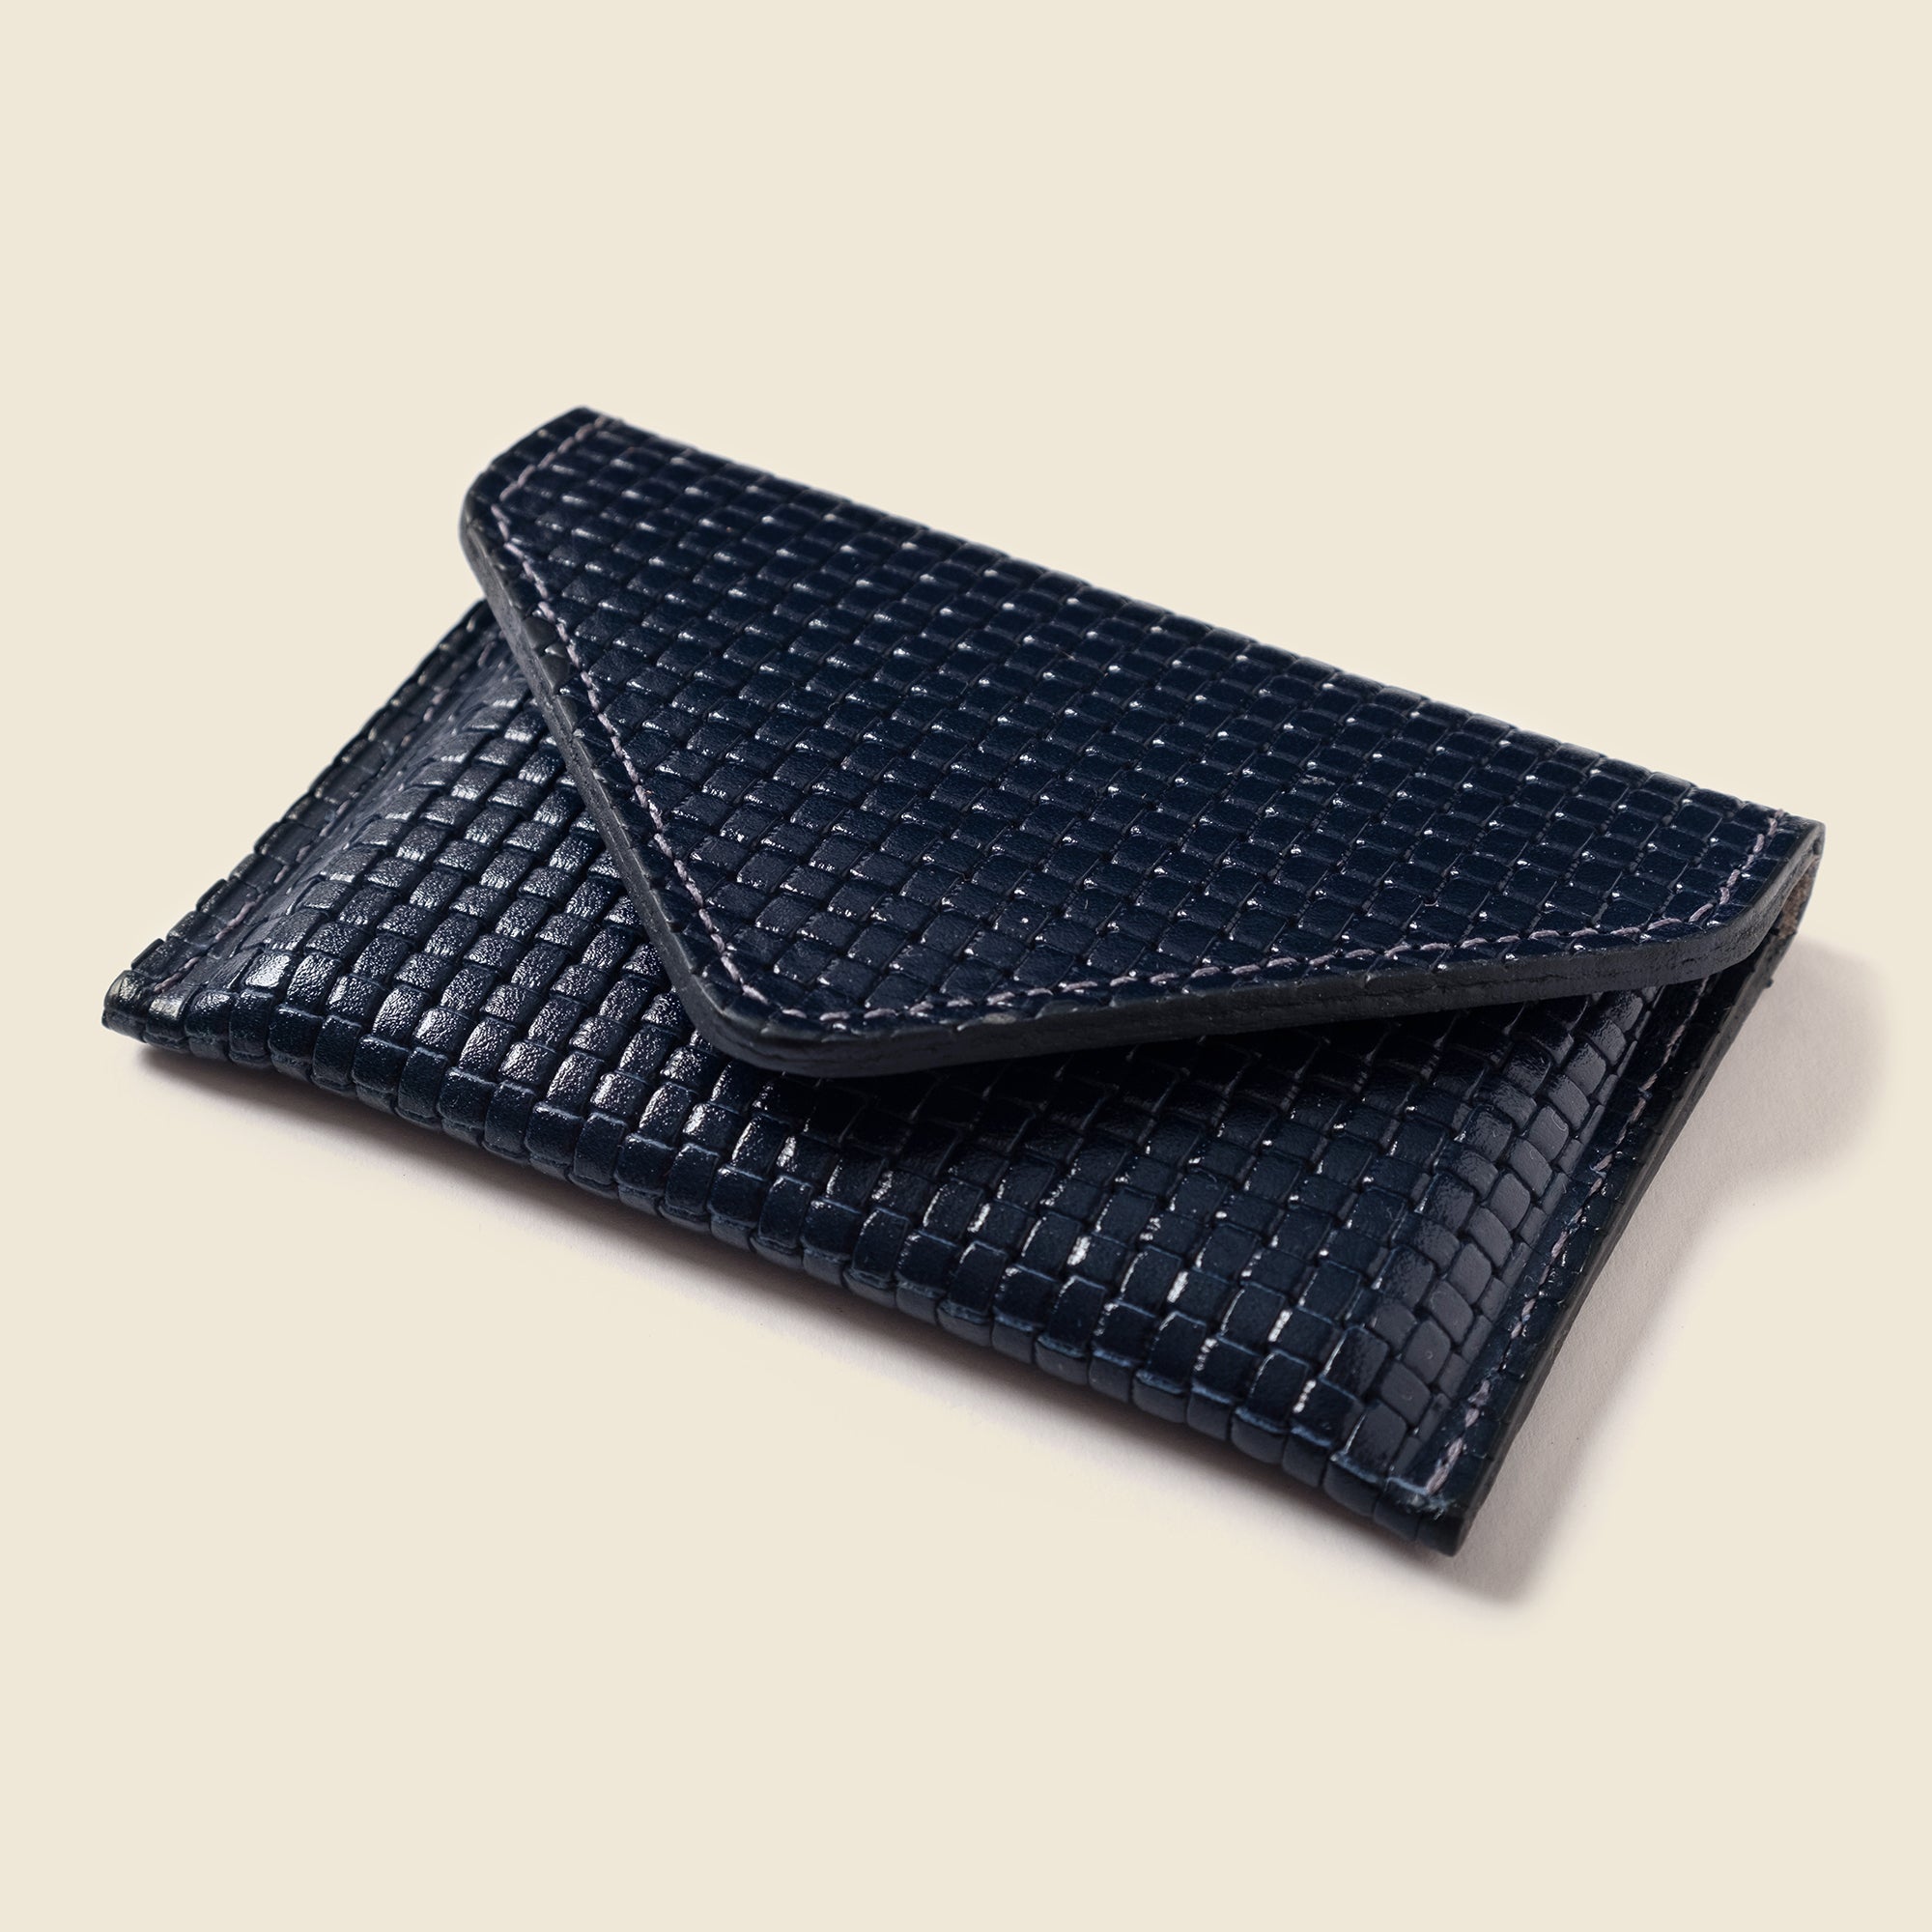 Mini Envelope Wallet With RFID protection - Navy Limited Edition